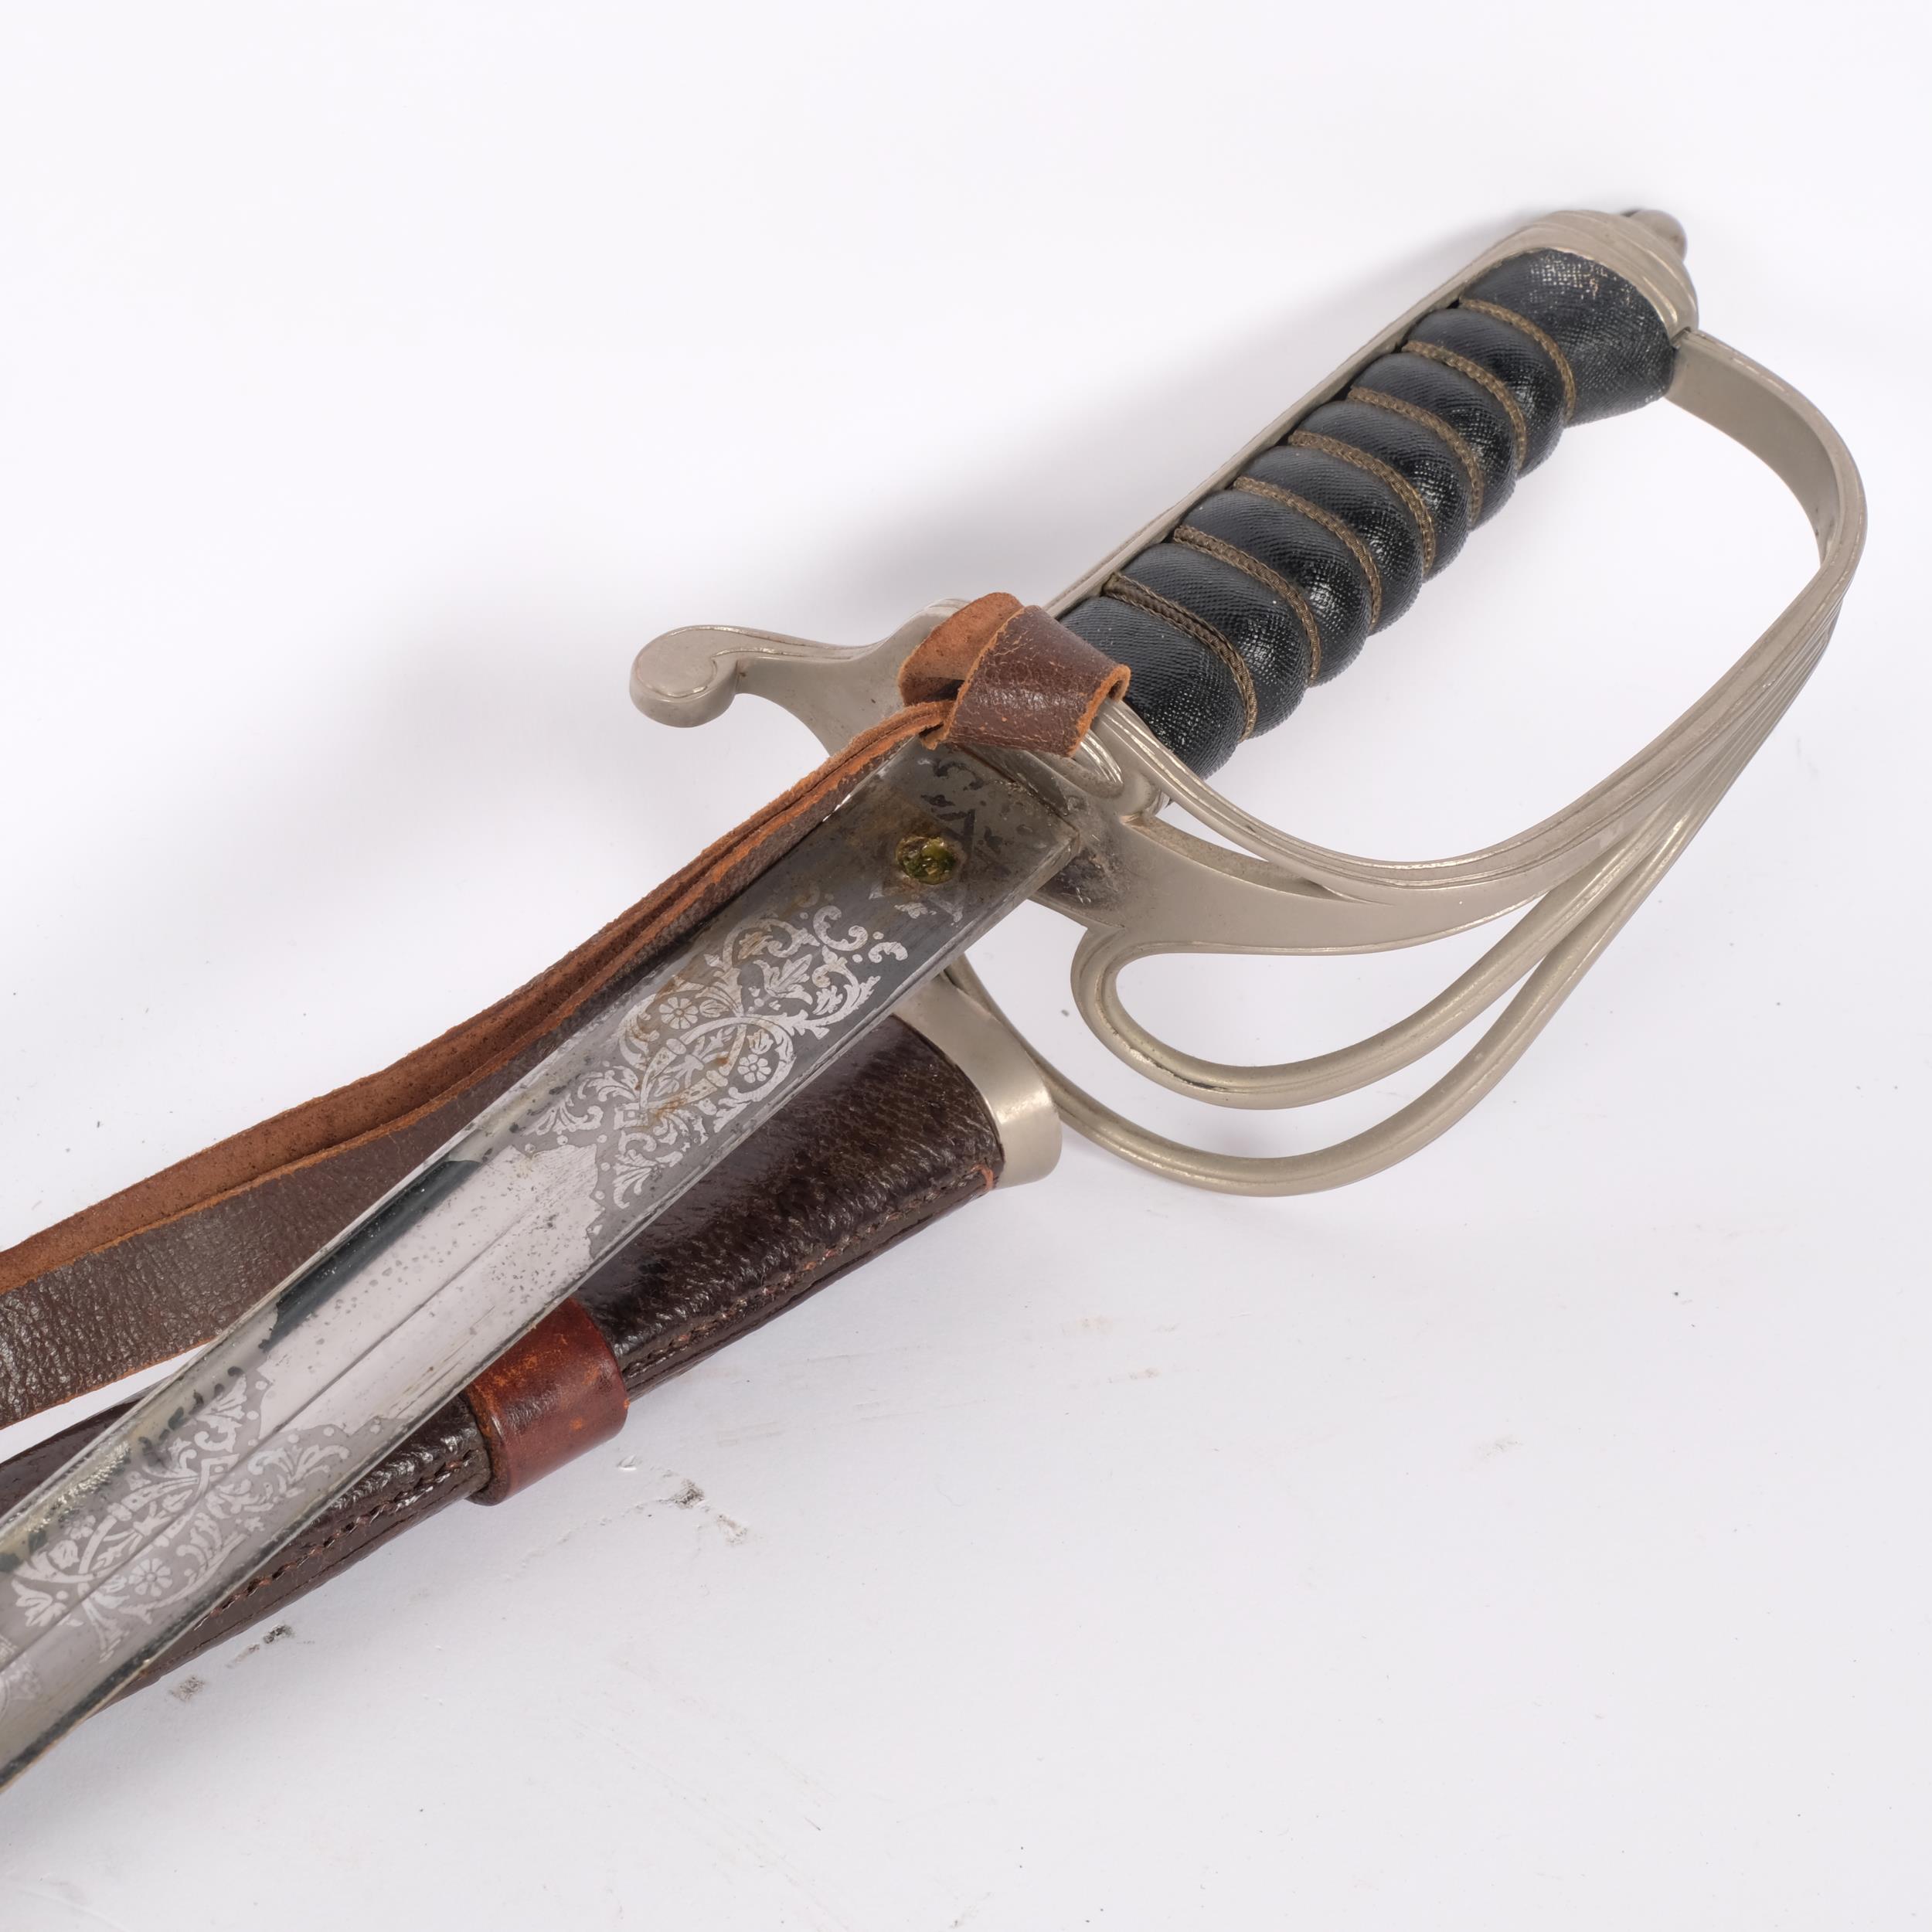 An 1821 pattern Light Cavalry Officer's sword, in leather scabbard, with engraved blade, overall - Image 2 of 2